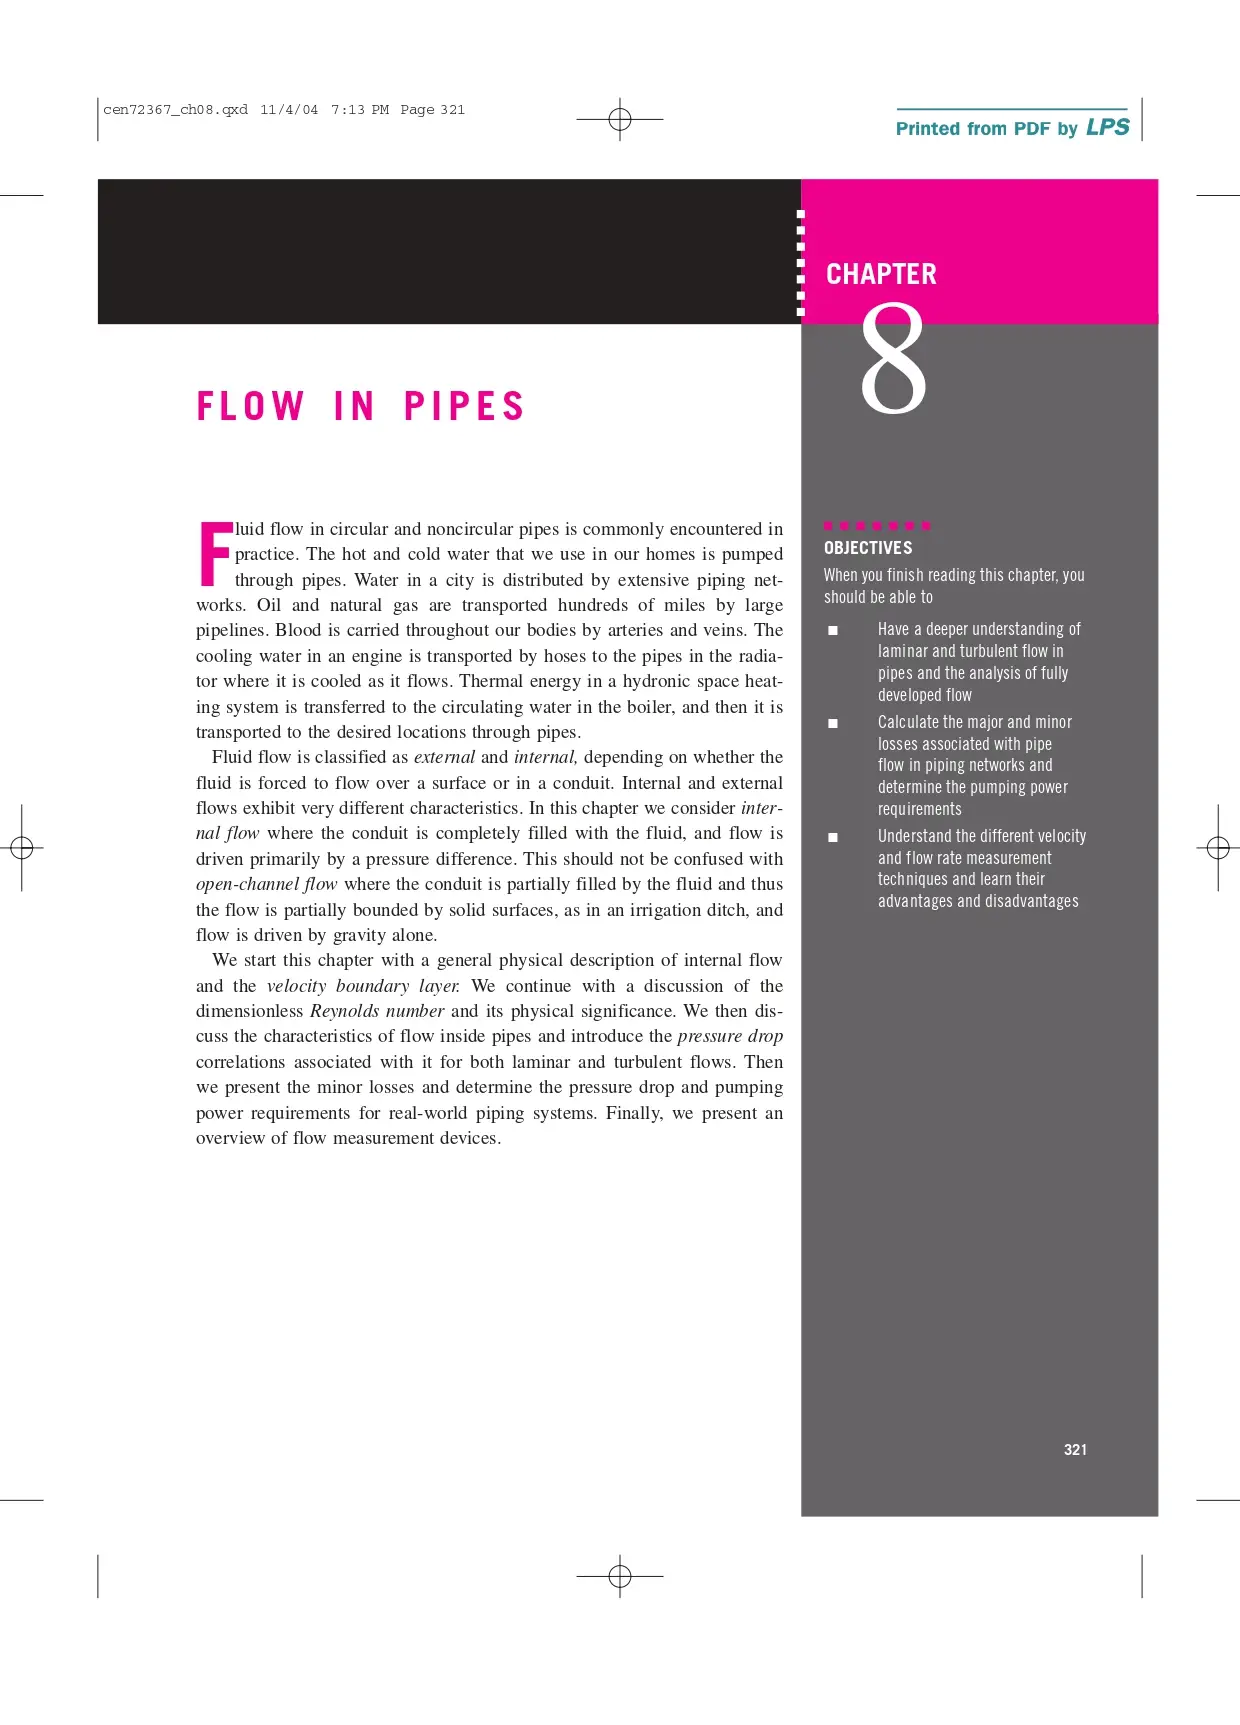 Chapter 8: Flow In Pipes